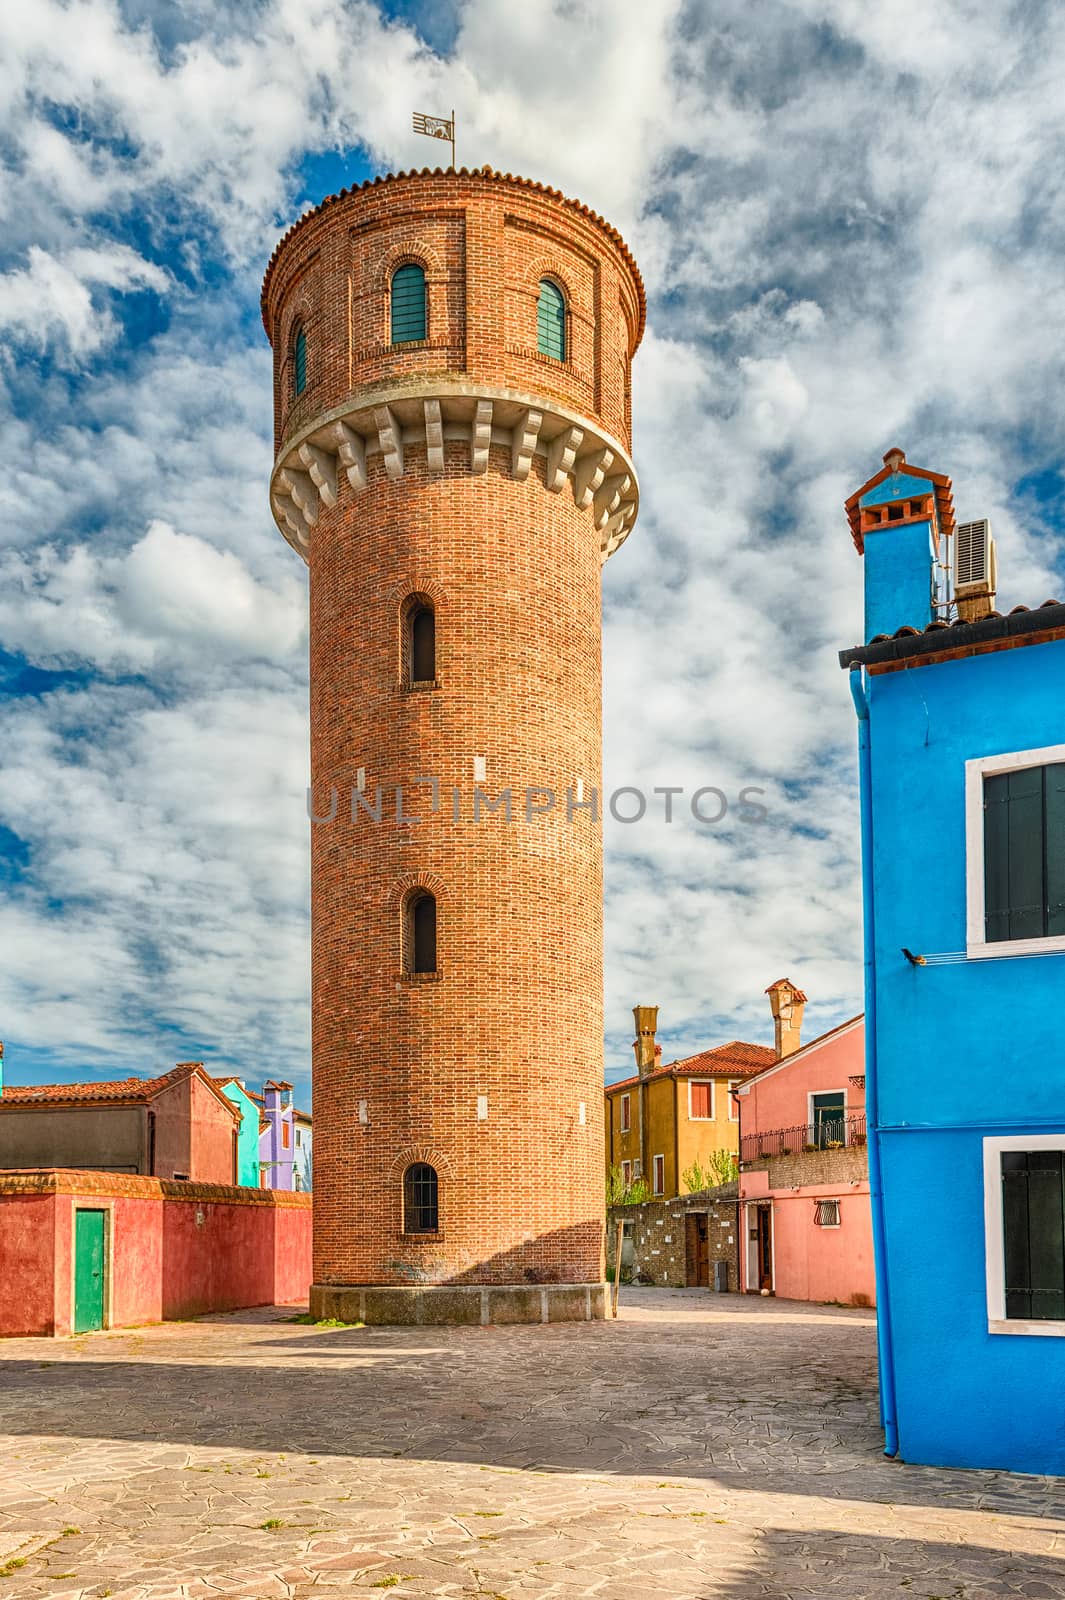 Water tower on the island of Burano, Venice, Italy. The island is a popular attraction for tourists due to its picturesque architecture